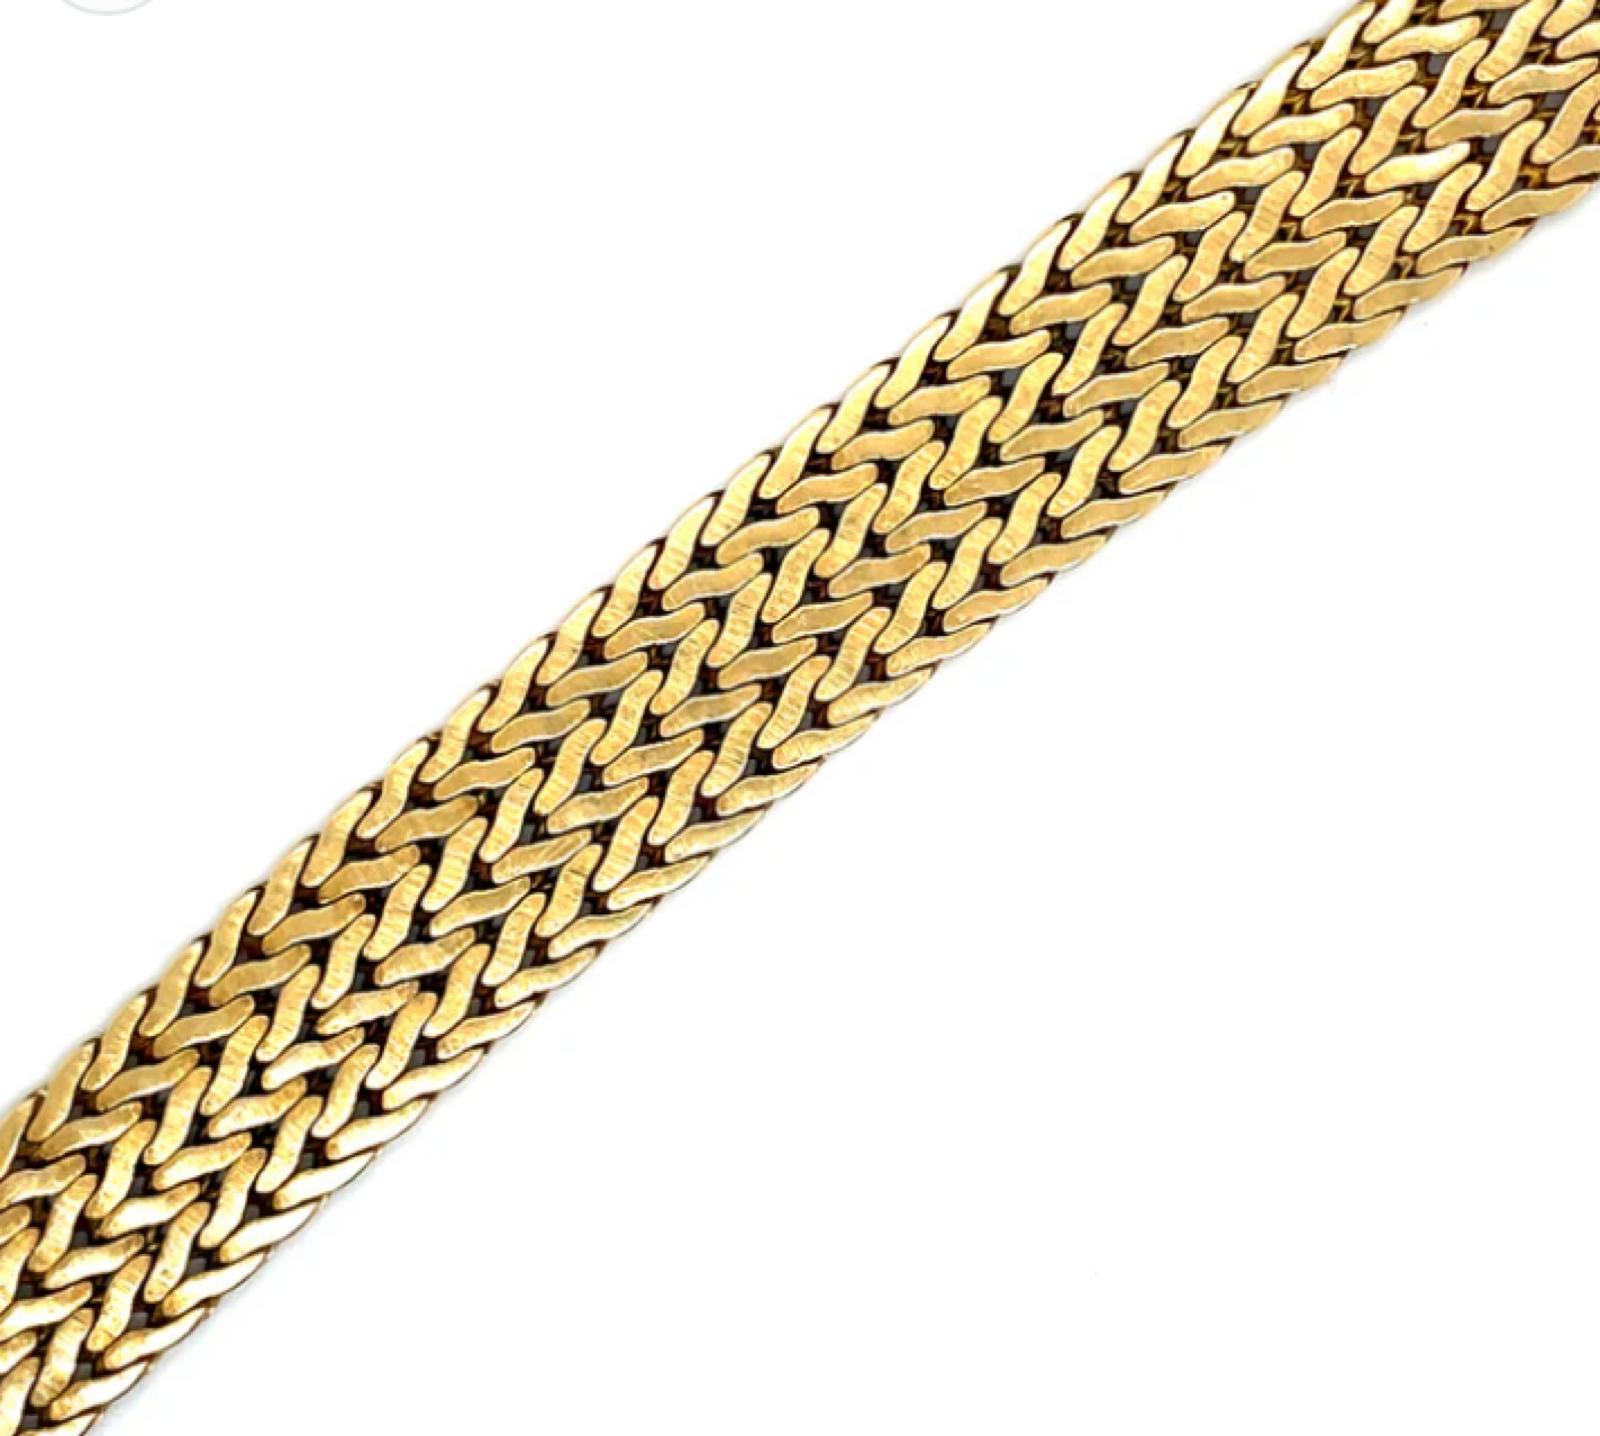 A vintage Buccellati 18 karat yellow gold bracelet, circa 1970.

A finely crafted 18 karat yellow gold bracelet comprised of 3 rows of flat chevron links and finished with a concealed clasp fitting.

The house of Buccellati is famous for its